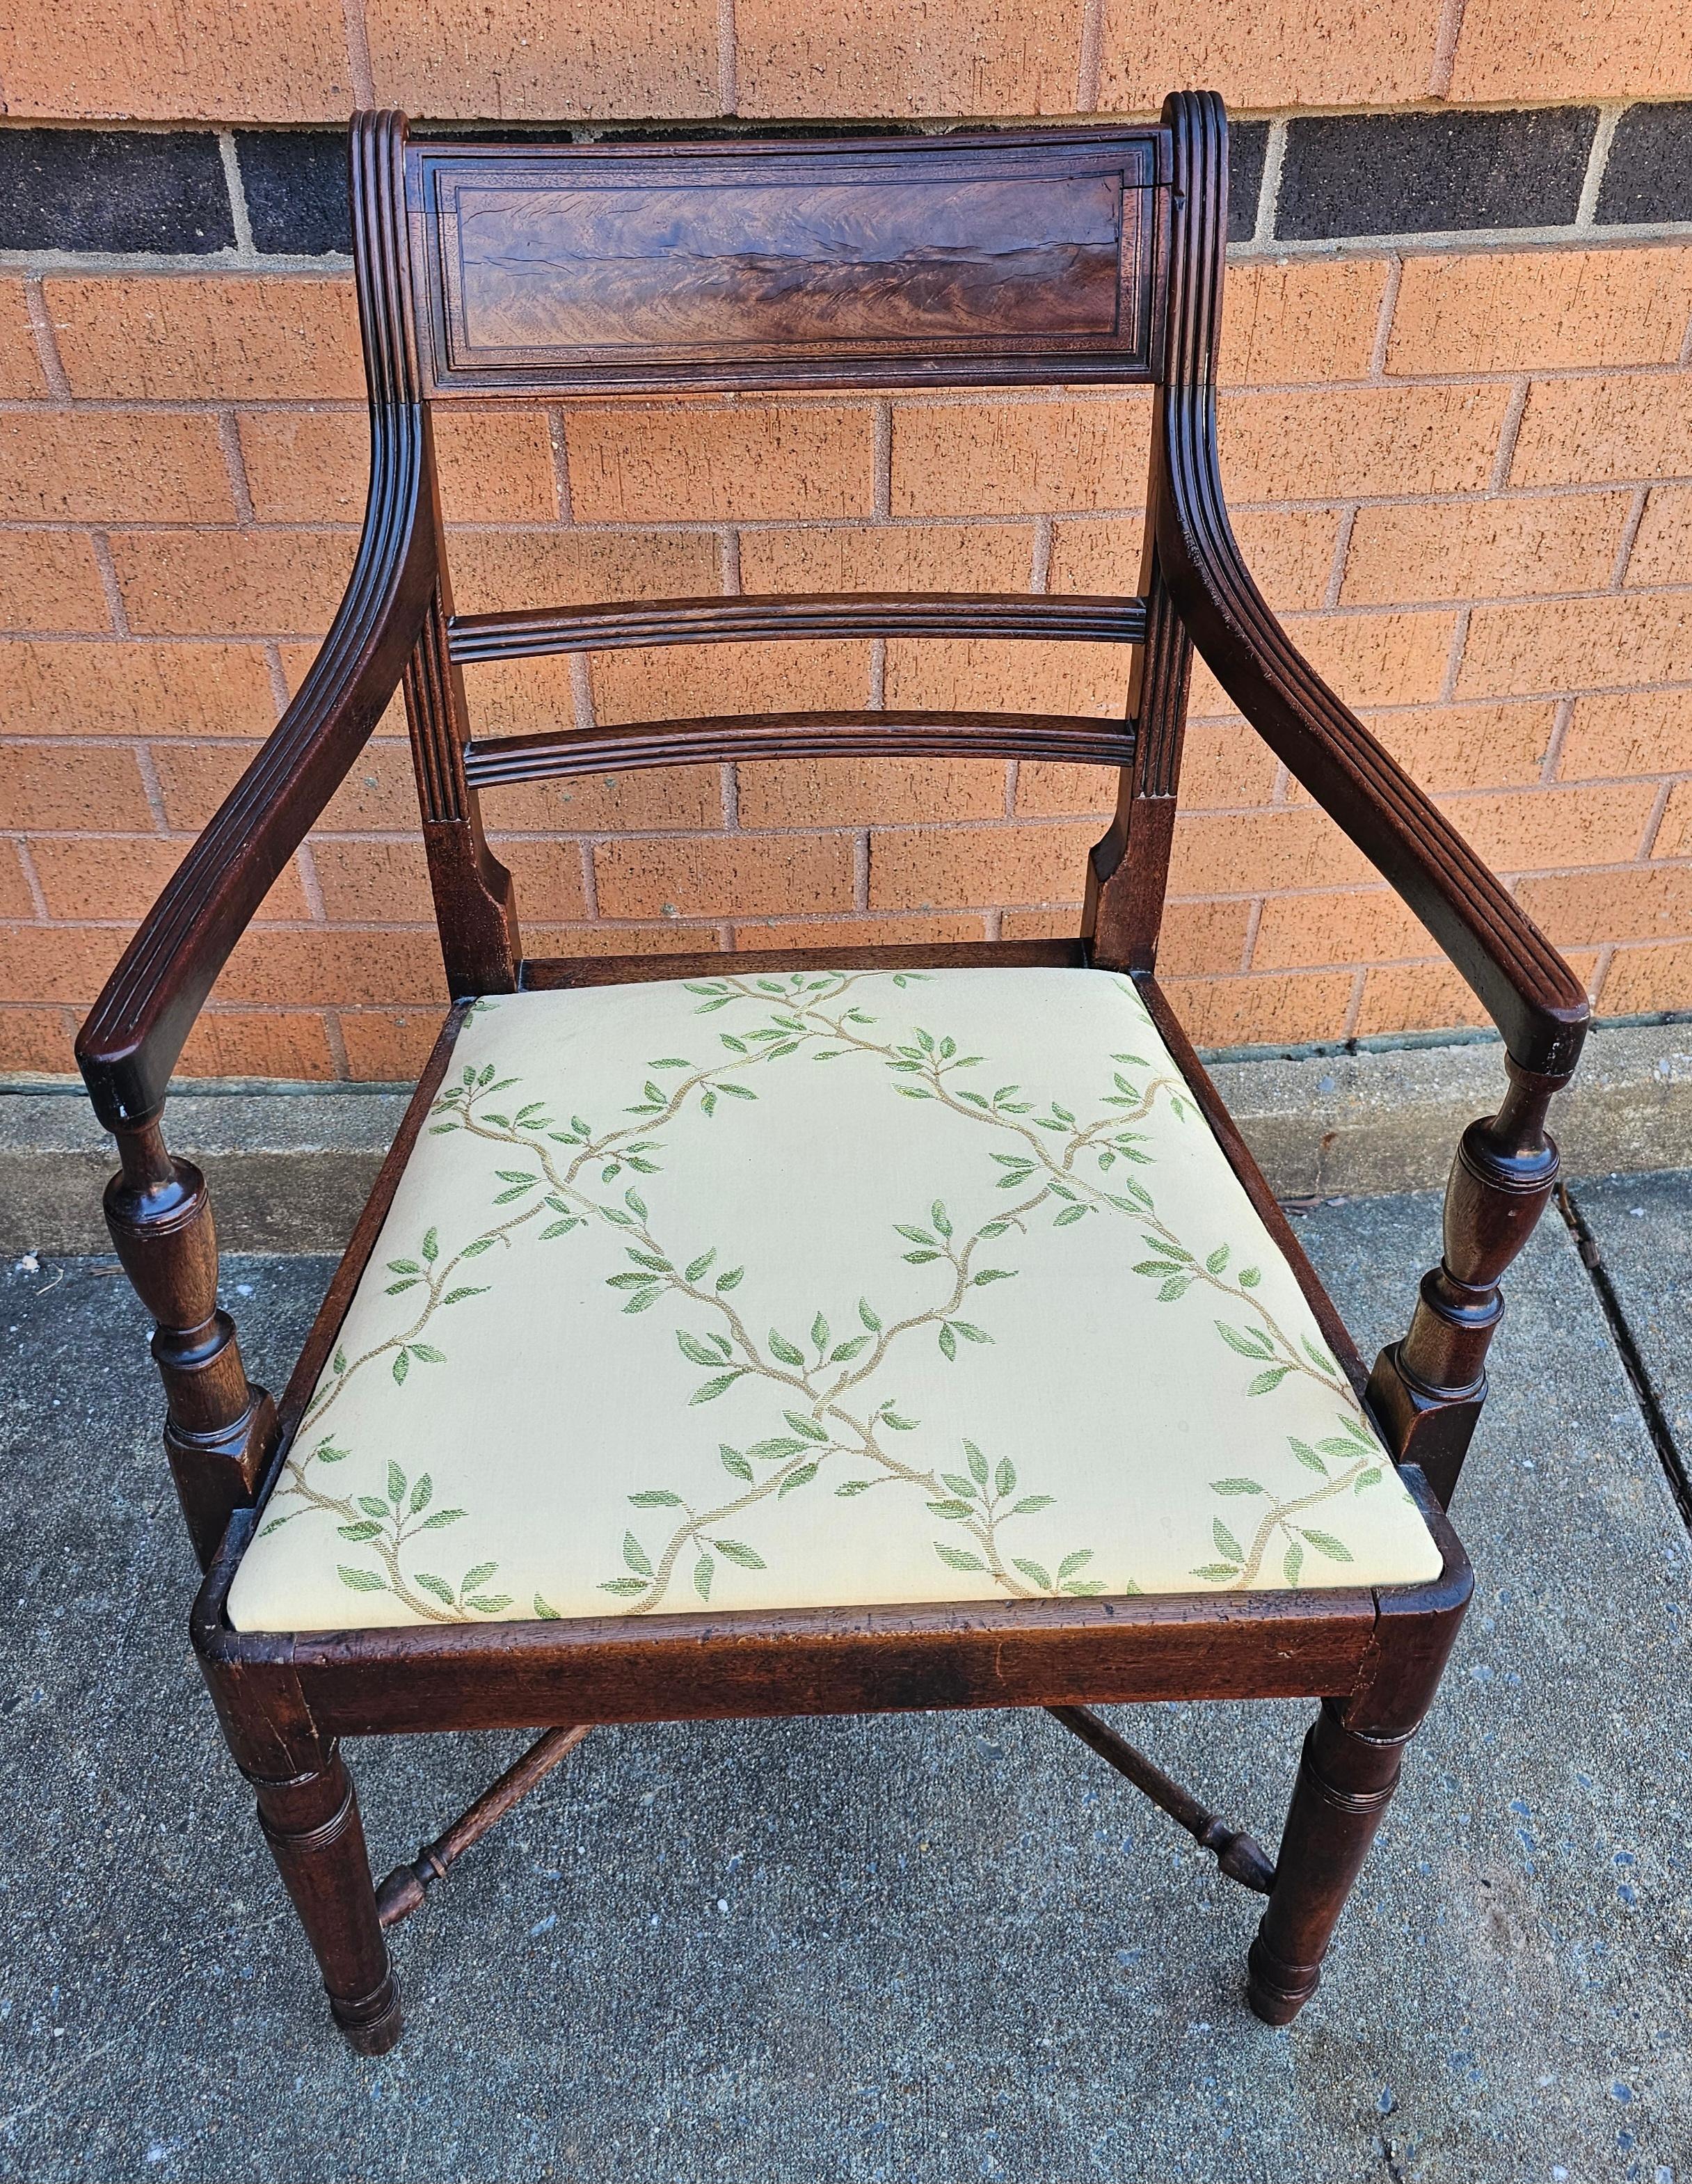 A late 18th to Early 19th Century George III Mahogany upholstered Armchair with X stretcher leg joints. Very sturdy antique condition with newer upholstery. Measures 21.75